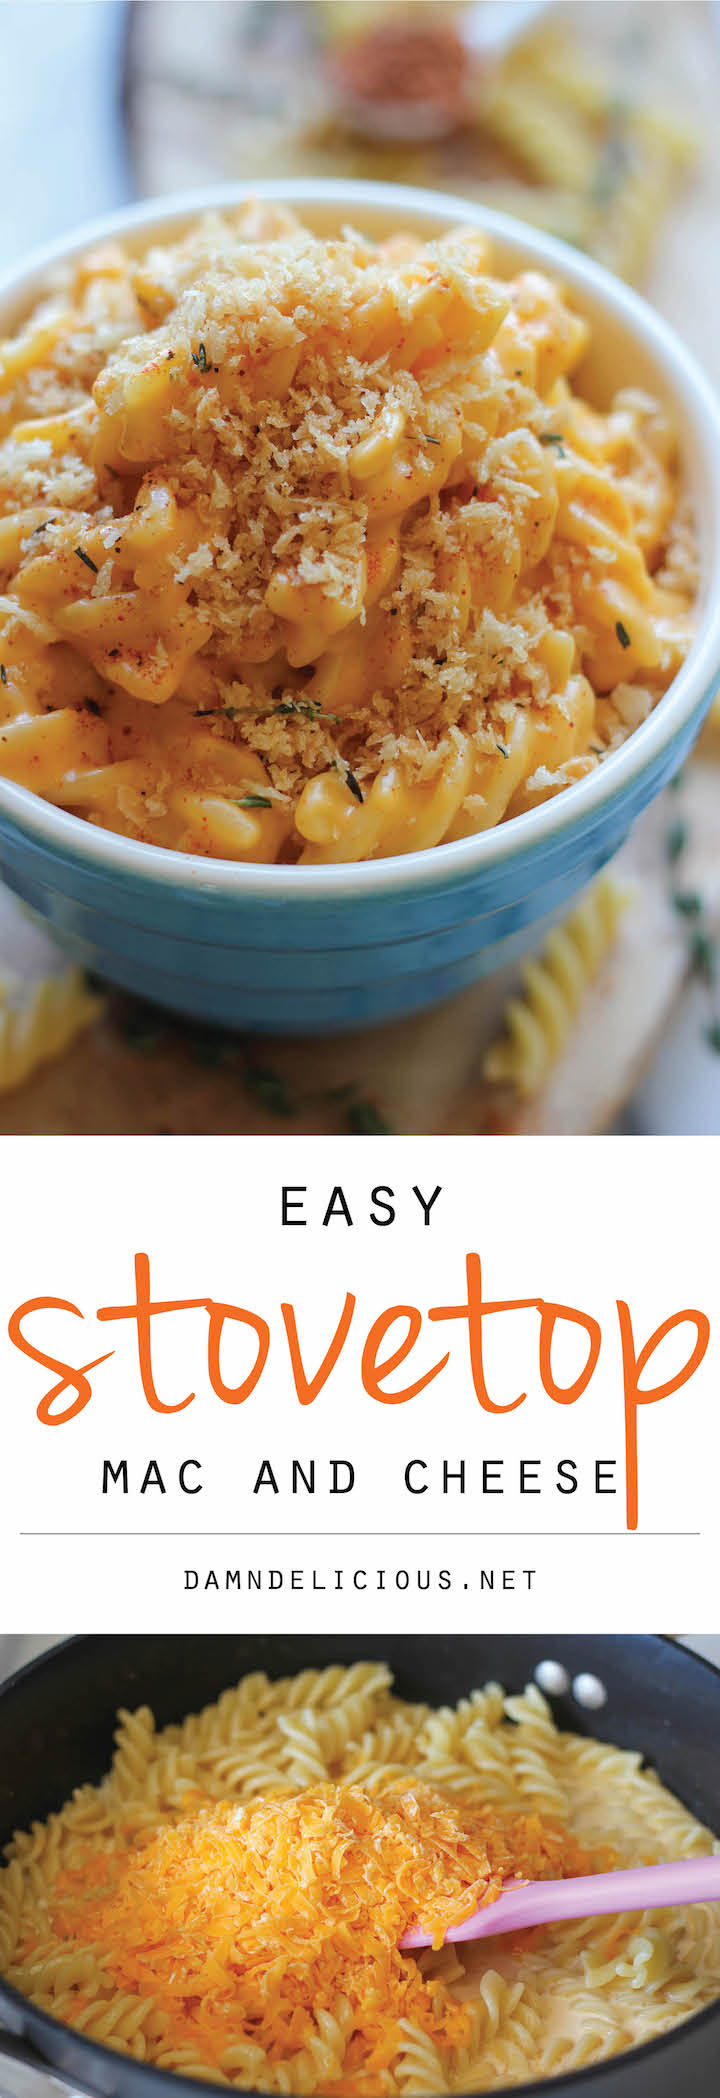 Stovetop Mac and Cheese - A quick and easy, no-fuss mac and cheese made in less than 30 min. Comfort food never tasted so good!